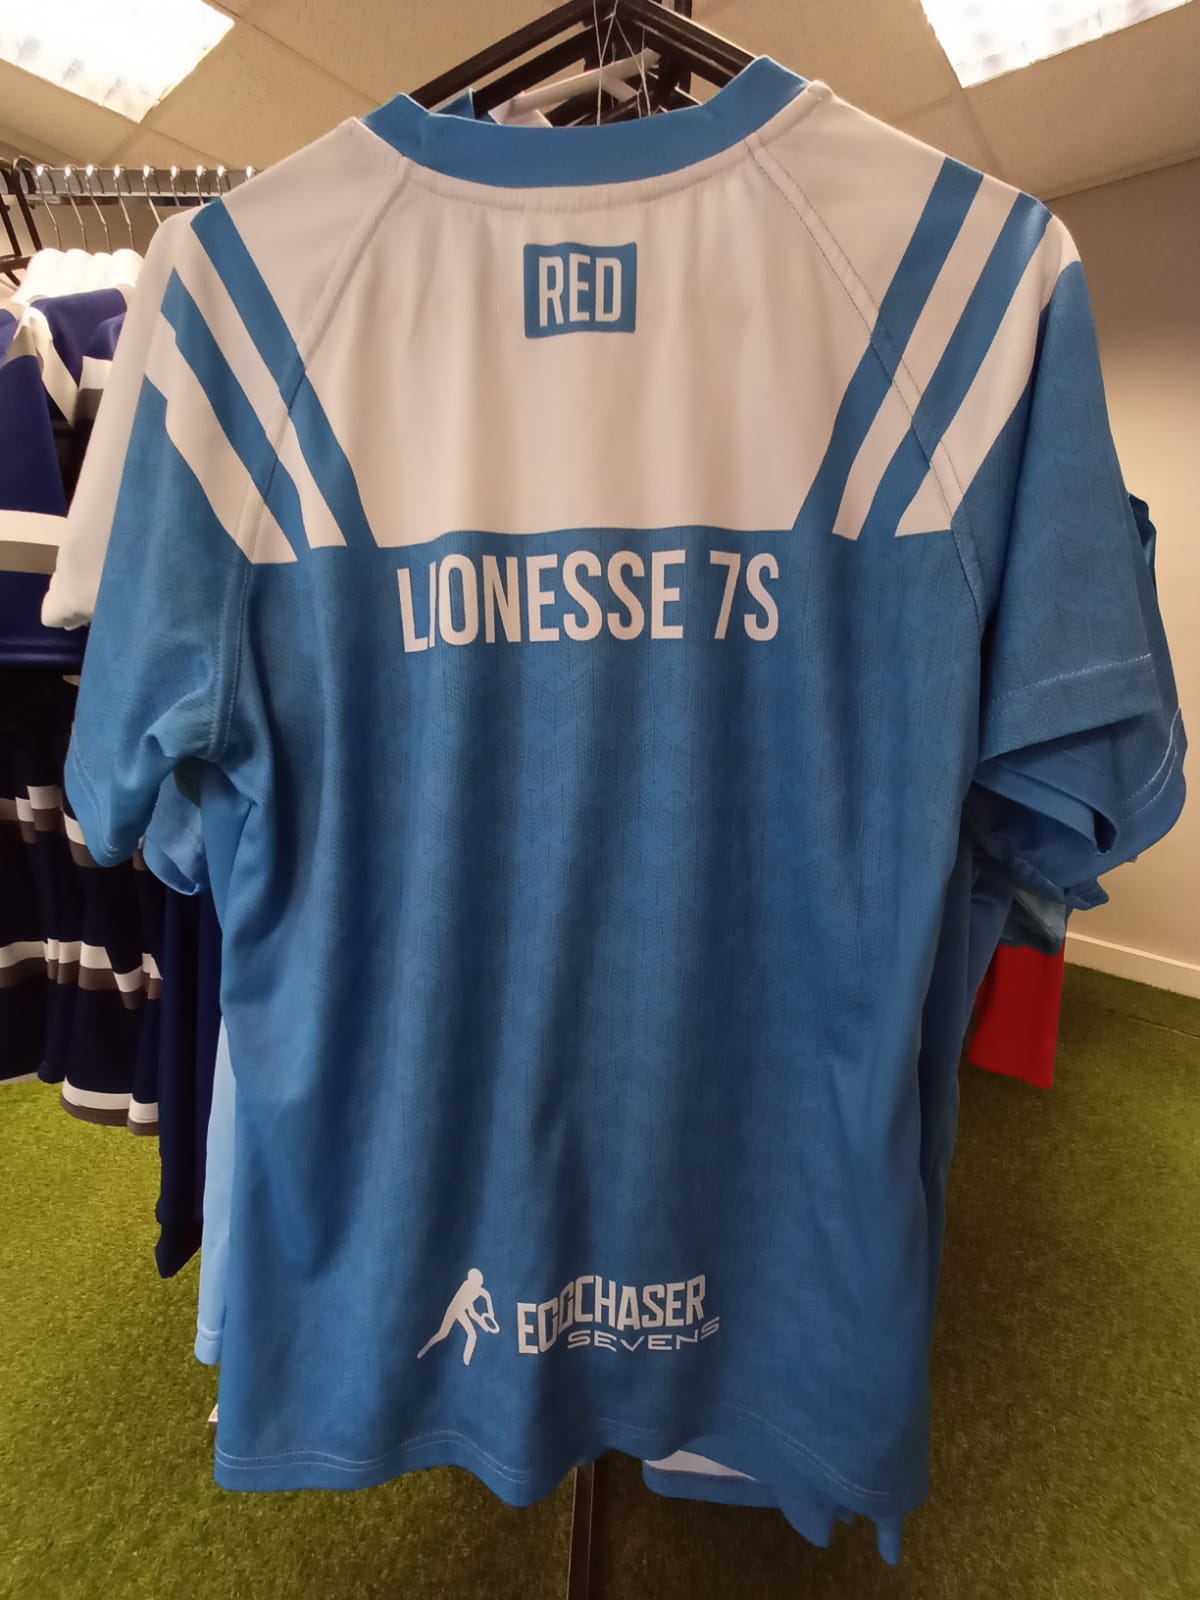 Eggchaser Lioness's 7s Rugby Jersey - Match worn #7 #8 #9 #10 #11 #12 #13